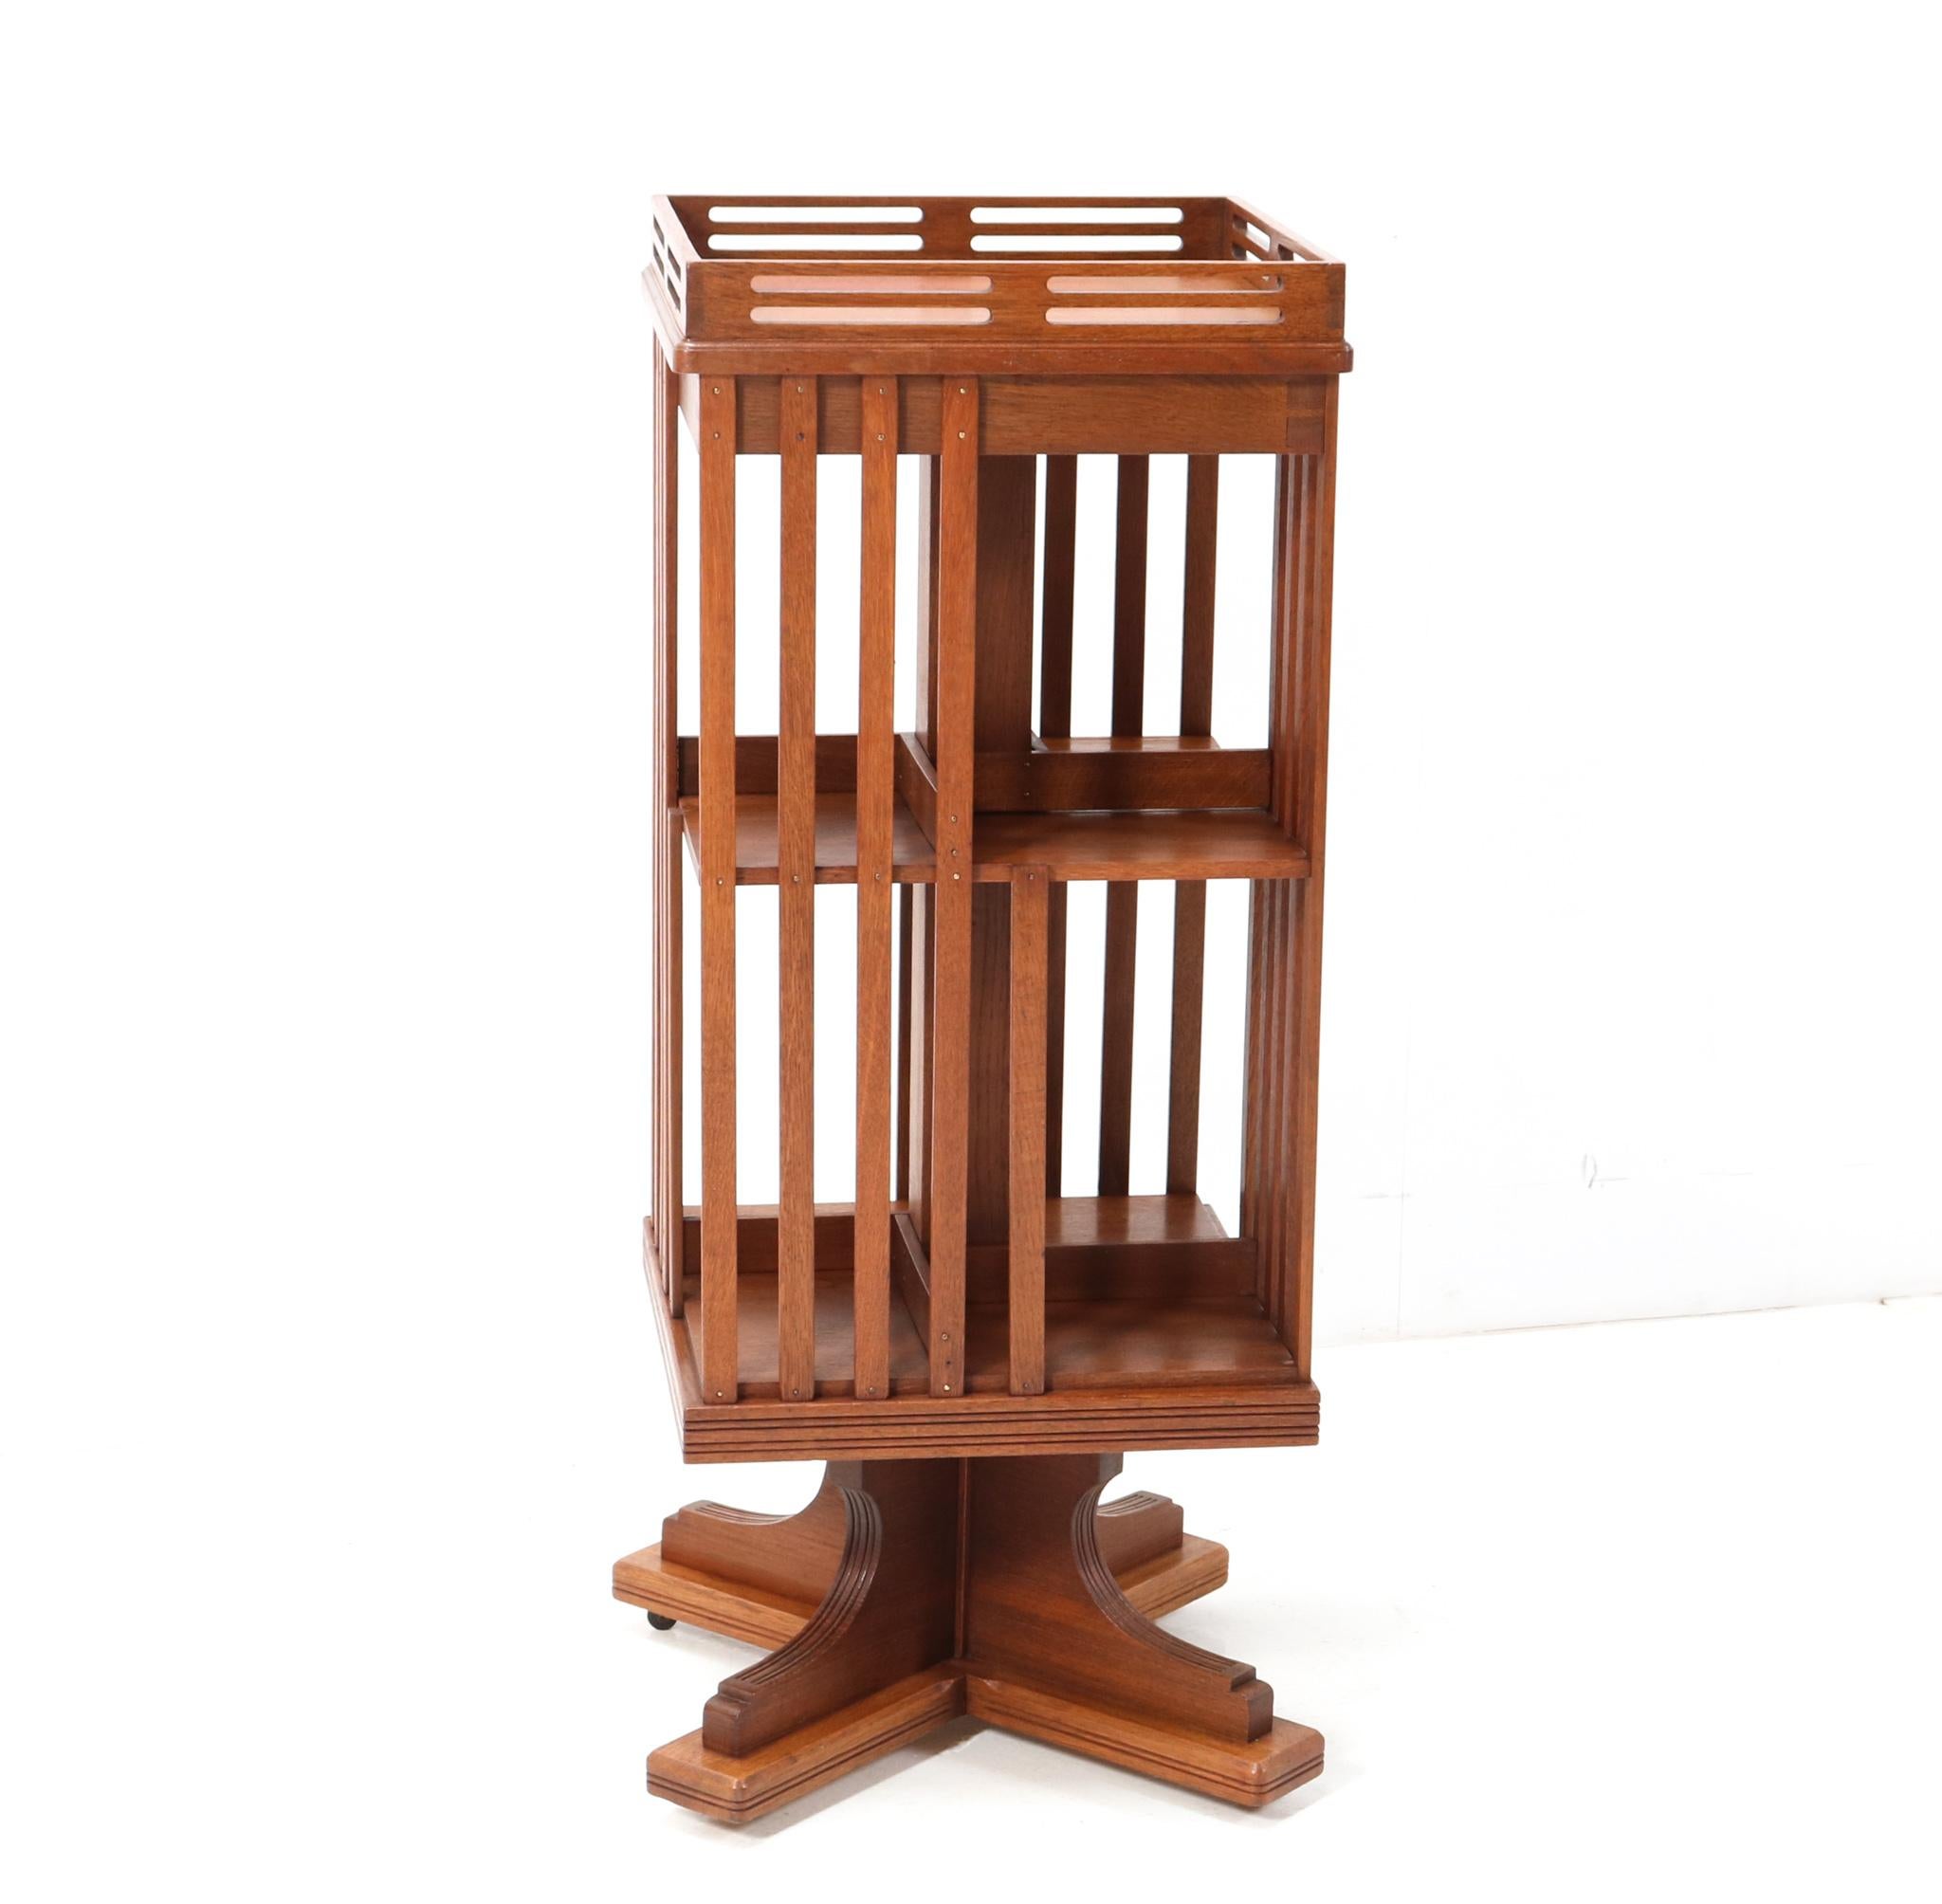 Stunning Art Nouveau Jugendstil revolving bookcase.
Striking Dutch design from the 1900s.
Solid oak and the wheels are in good working order.
This wonderful Art Nouveau Jugendstil revolving bookcase is in very good condition with minor wear